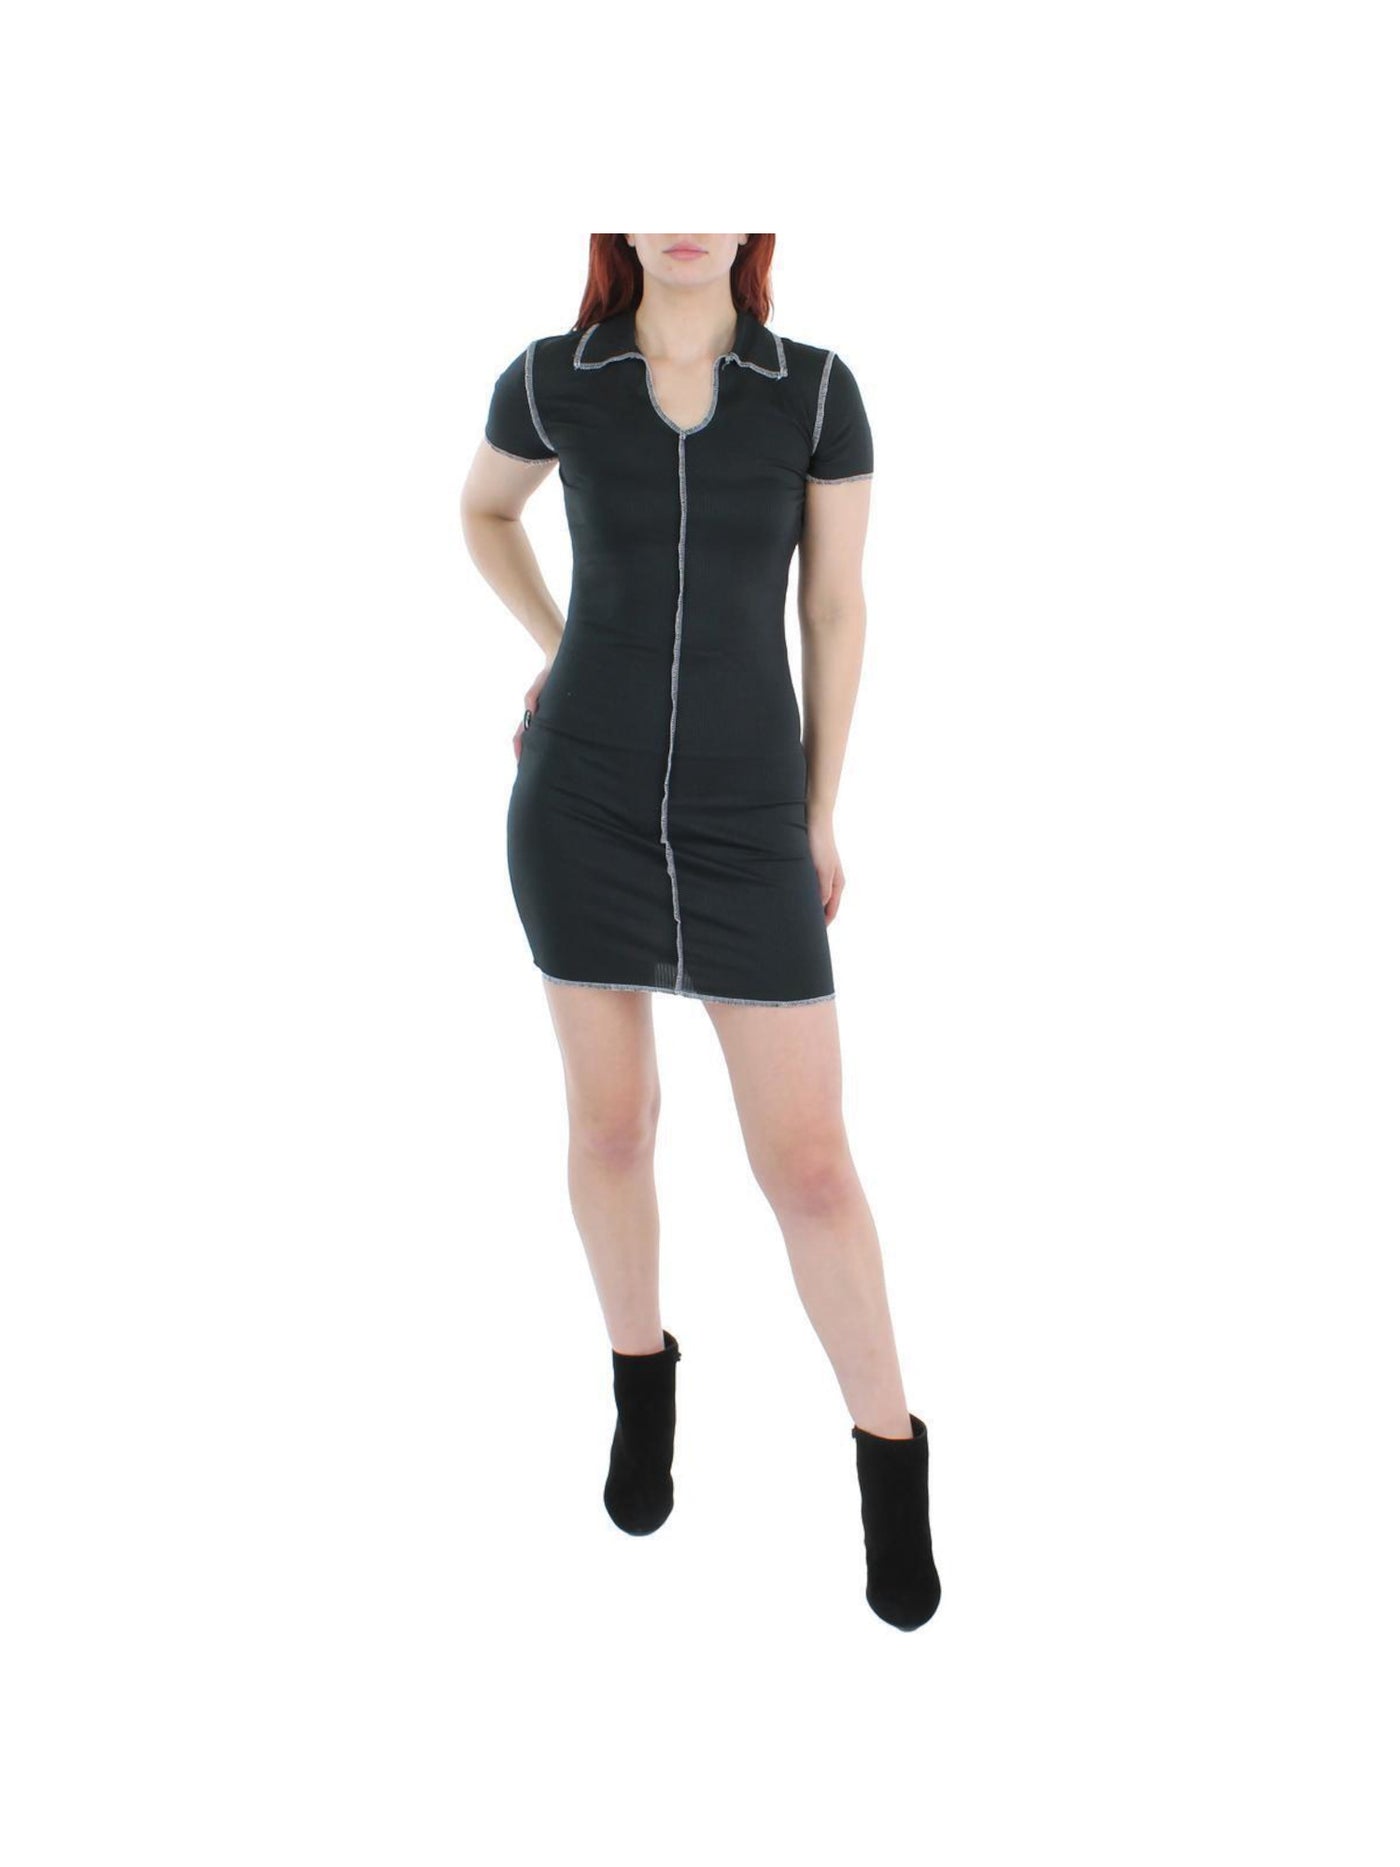 NO COMMENT Womens Black Fitted Ribbed Pullover Collared Short Sleeve Scoop Neck Short Shirt Dress S